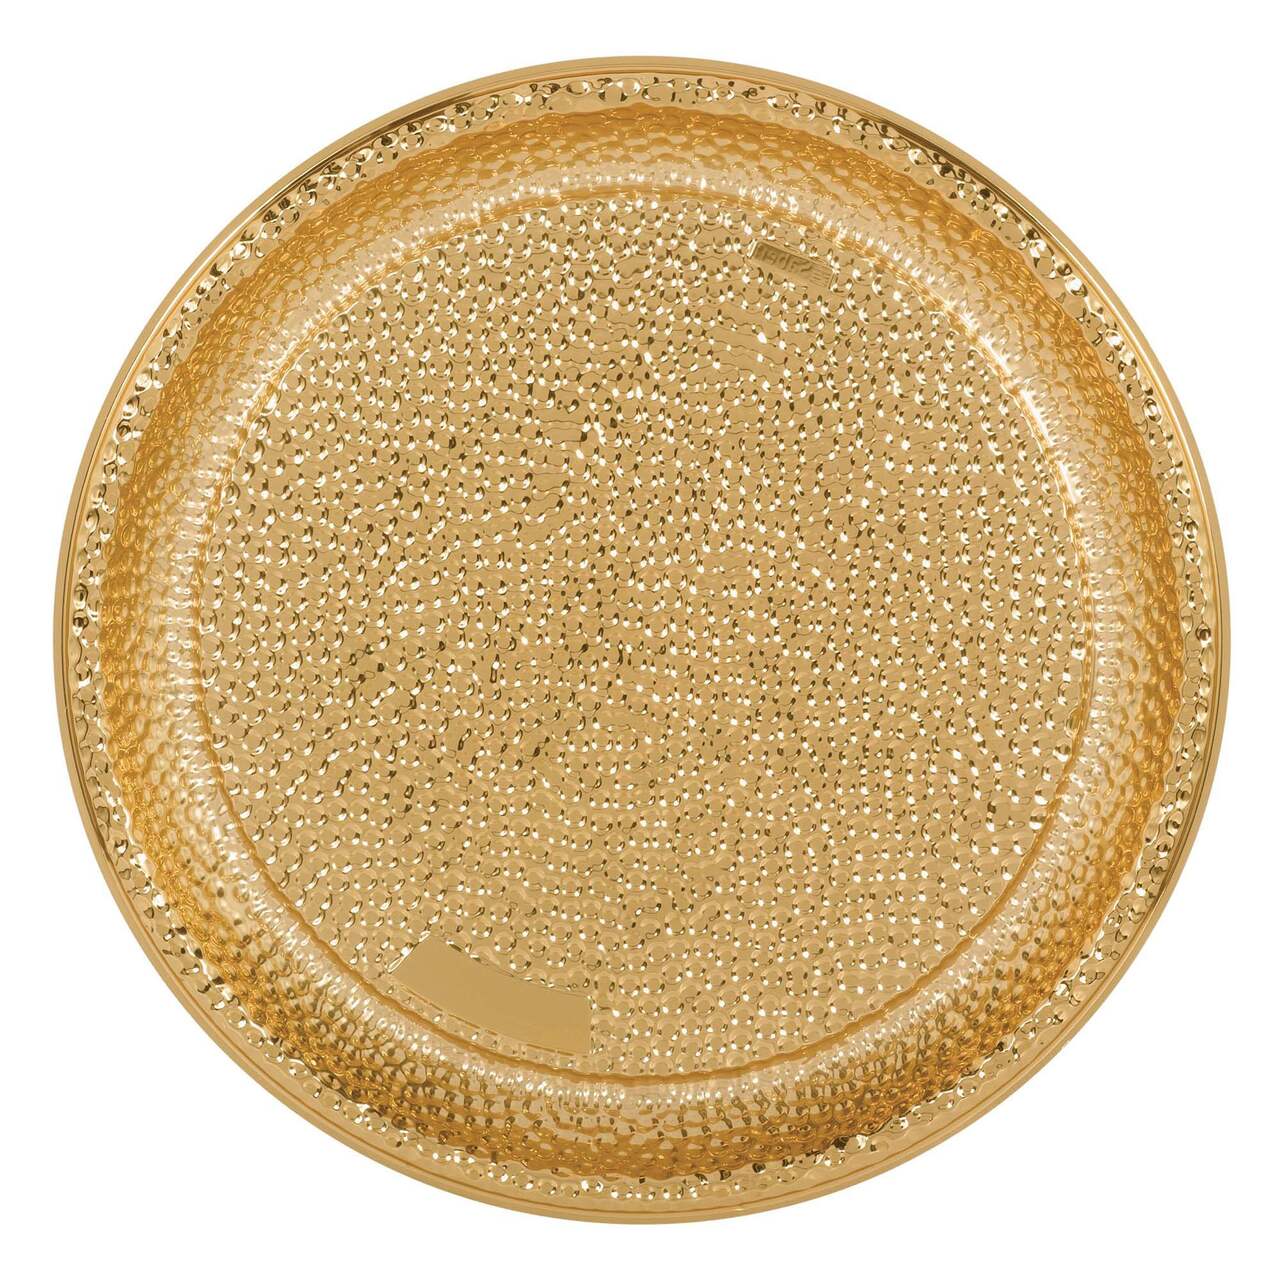 Large Gold Hammered Serving Tray